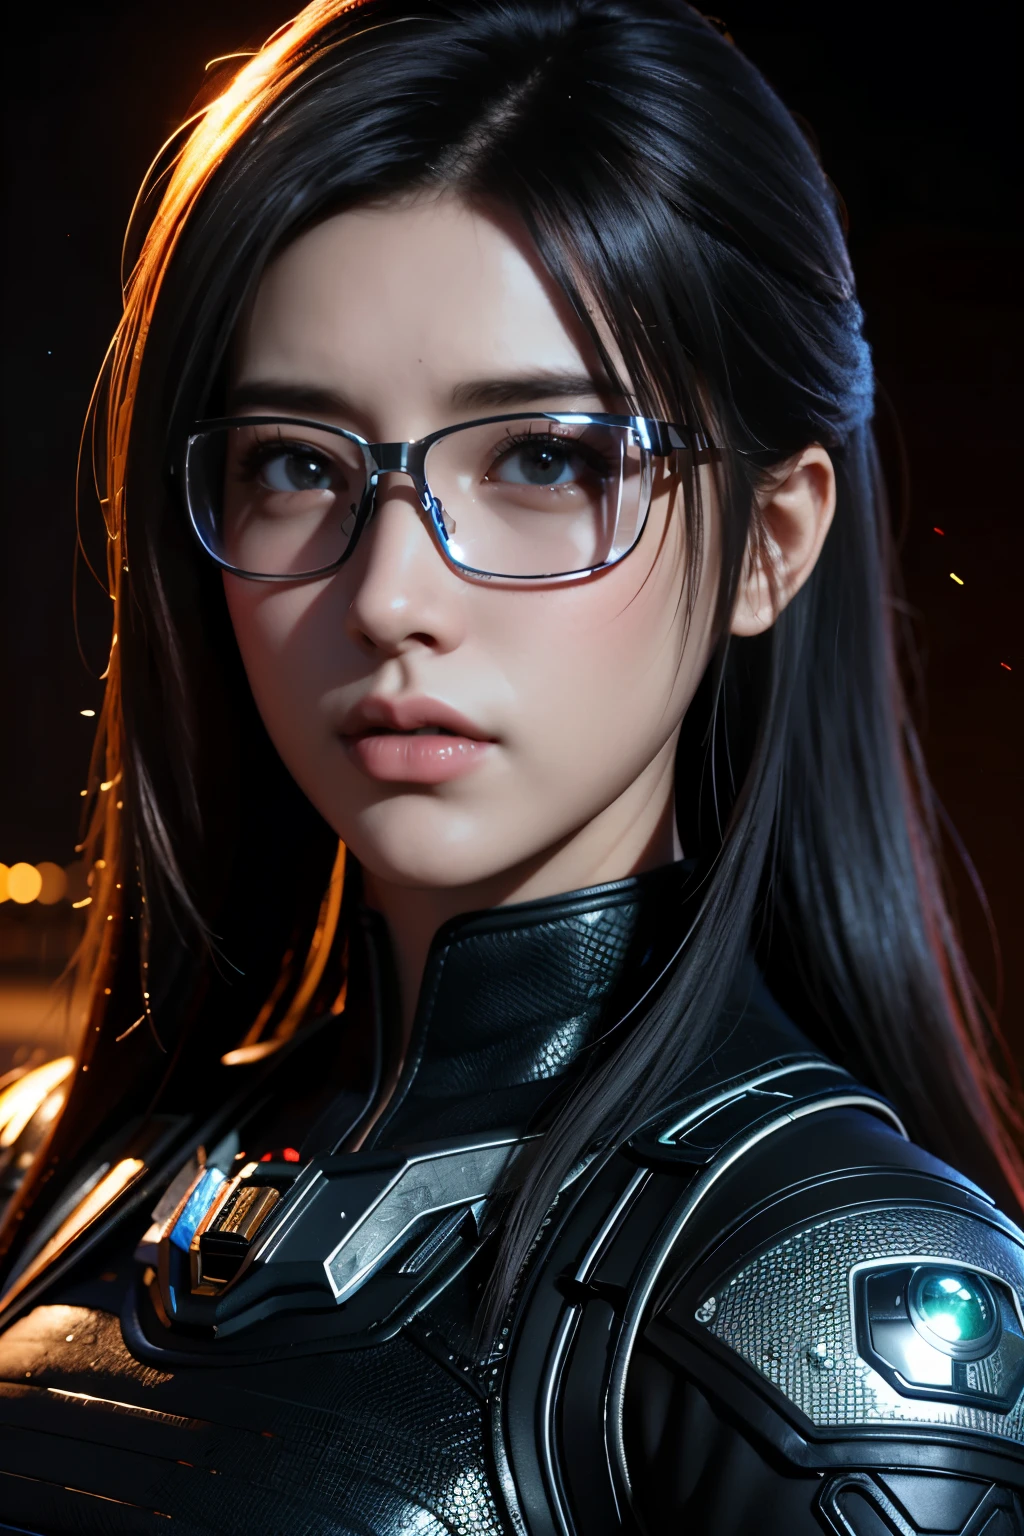 Masterpiece，The best qualities，Very high resolution，8K，((Portrait))，((Head close-up))，Original photo，real photo，Digital Photography， (Cyberpunk-style female cops of the future world)，(Fighting girl)，22-year-old girl，(Long hair in a casual style，blue)，An eye rich in detail，((Lachrymal nevus))，lip gloss，(Elegant and charming，Indifferent and noble)，(Future combat clothing full of mechanical style，A garment that combines the characteristics of a police uniform，A fancy badge，An intricate pattern of clothing，Glittering jewels，Joint Armor，Metallic luster，Power Armor，Red and white)，(Holographic light-emitting glasses full of futuristic style)，Cyberpunk Characters，Future Style， Photo poses，Street background，Movie lights，Ray tracing，Game CG，((3D Unreal Engine))，oc rendering reflection texture